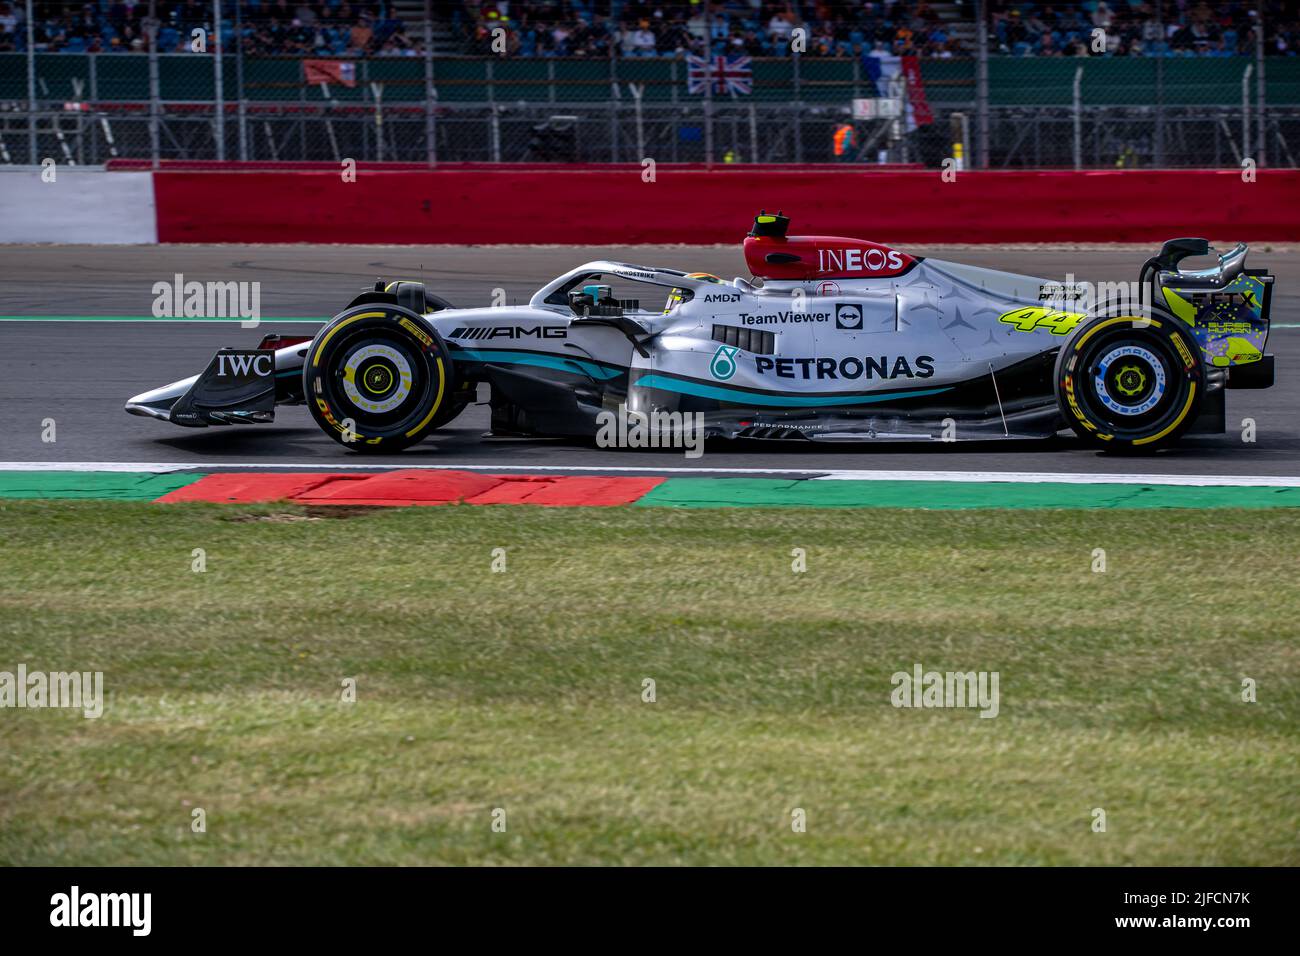 Silverstone, UK, 01st Jul 2022, Lewis Hamilton, from the UK competes for Mercedes AMG . Practice, round 10 of the 2022 Formula 1 championship. Credit: Michael Potts/Alamy Live News Stock Photo